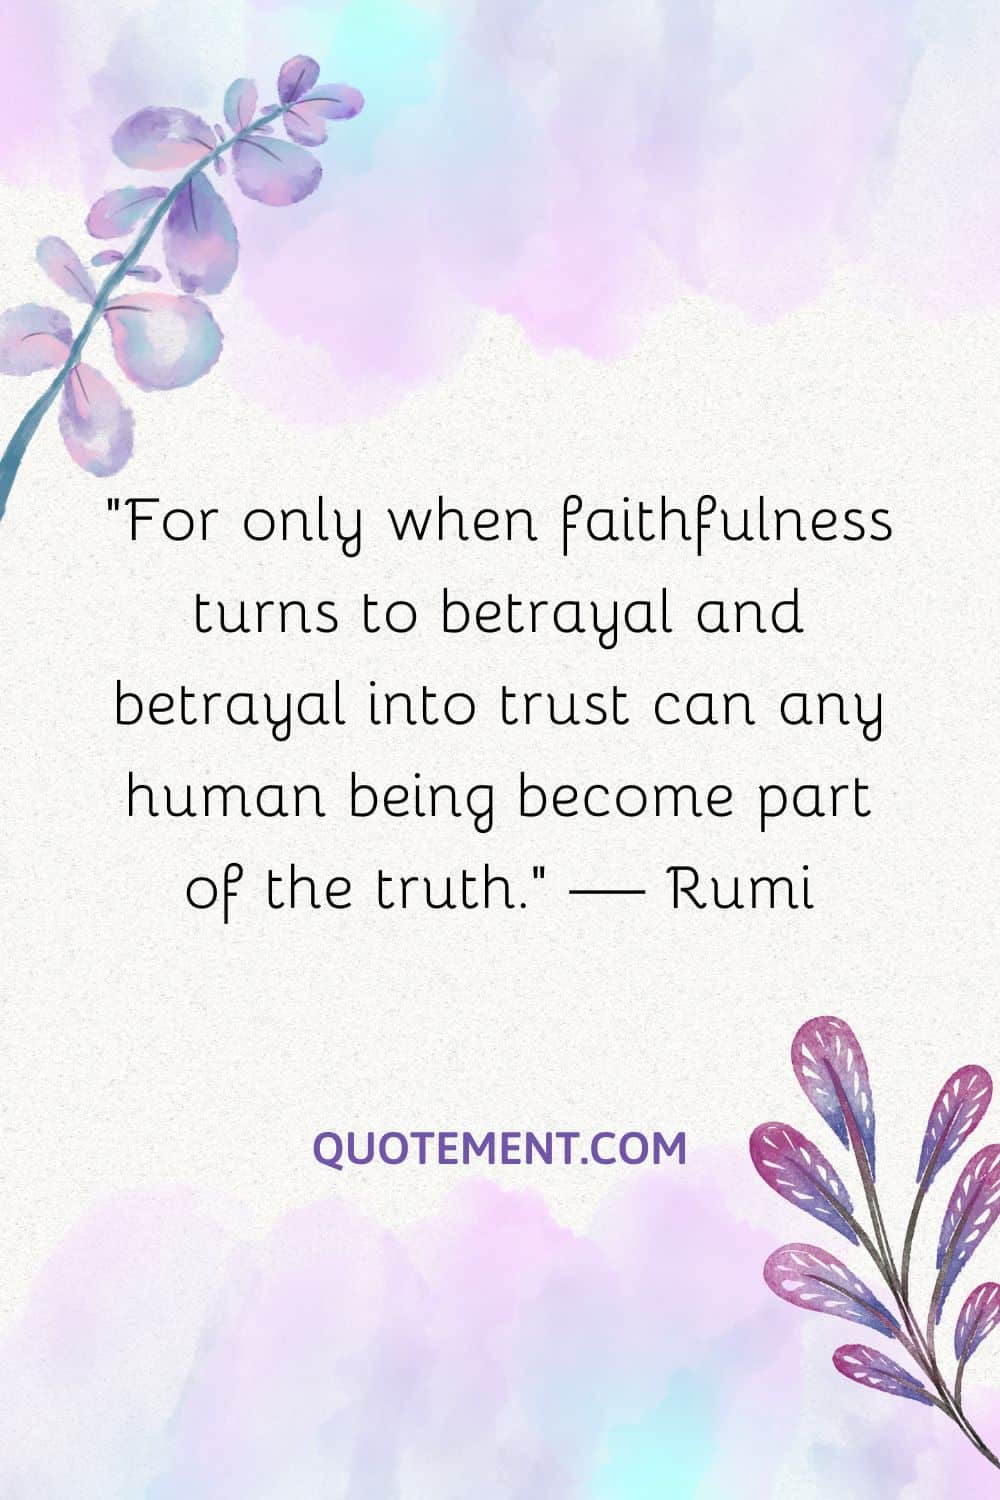 For only when faithfulness turns to betrayal and betrayal into trust can any human being become part of the truth